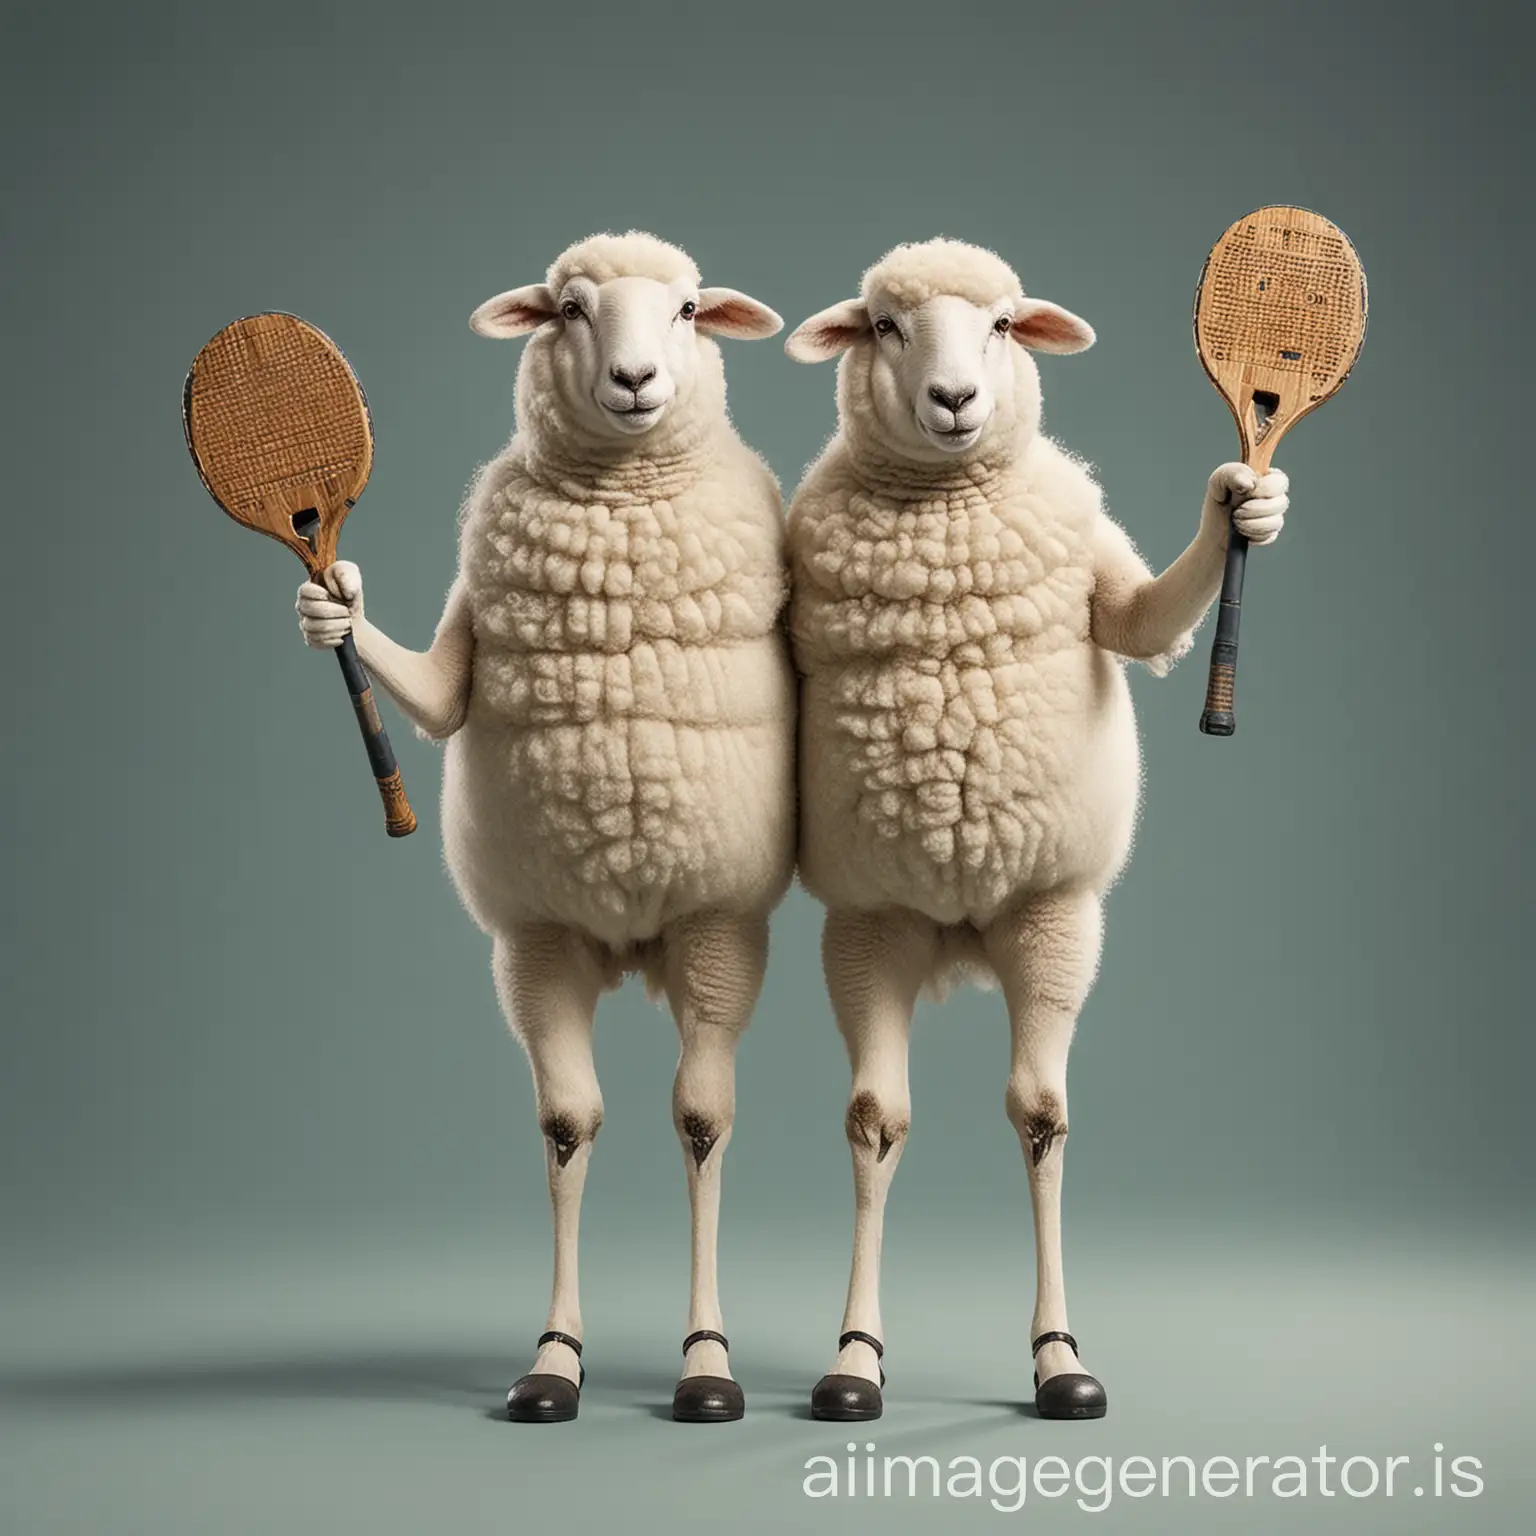 Sheep-Playing-Tennis-with-Paddle-Rackets